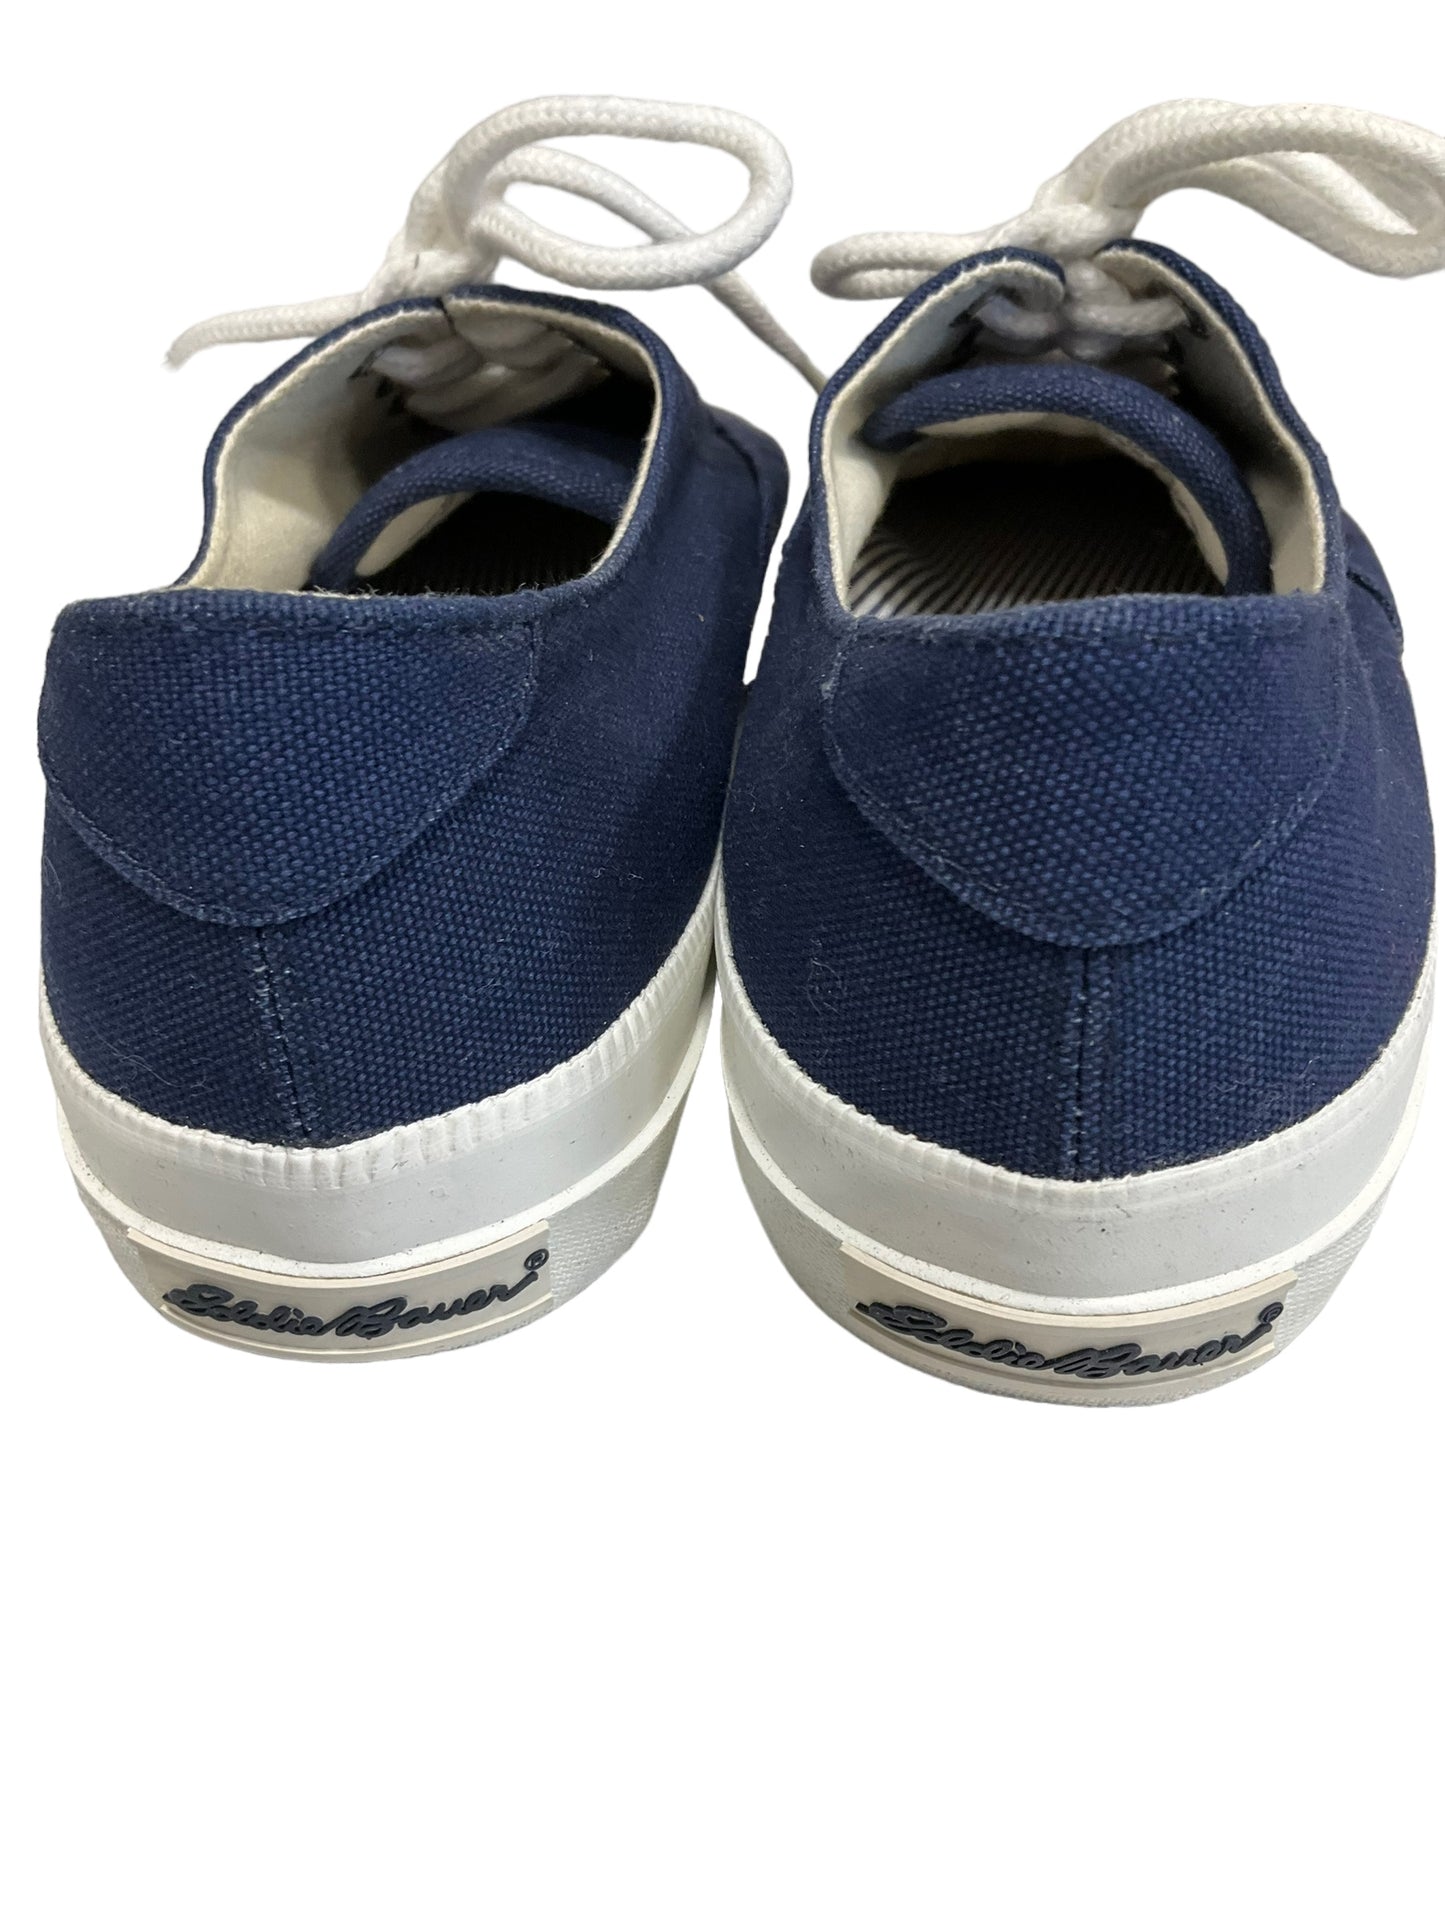 Shoes Sneakers By Eddie Bauer O  Size: 6.5